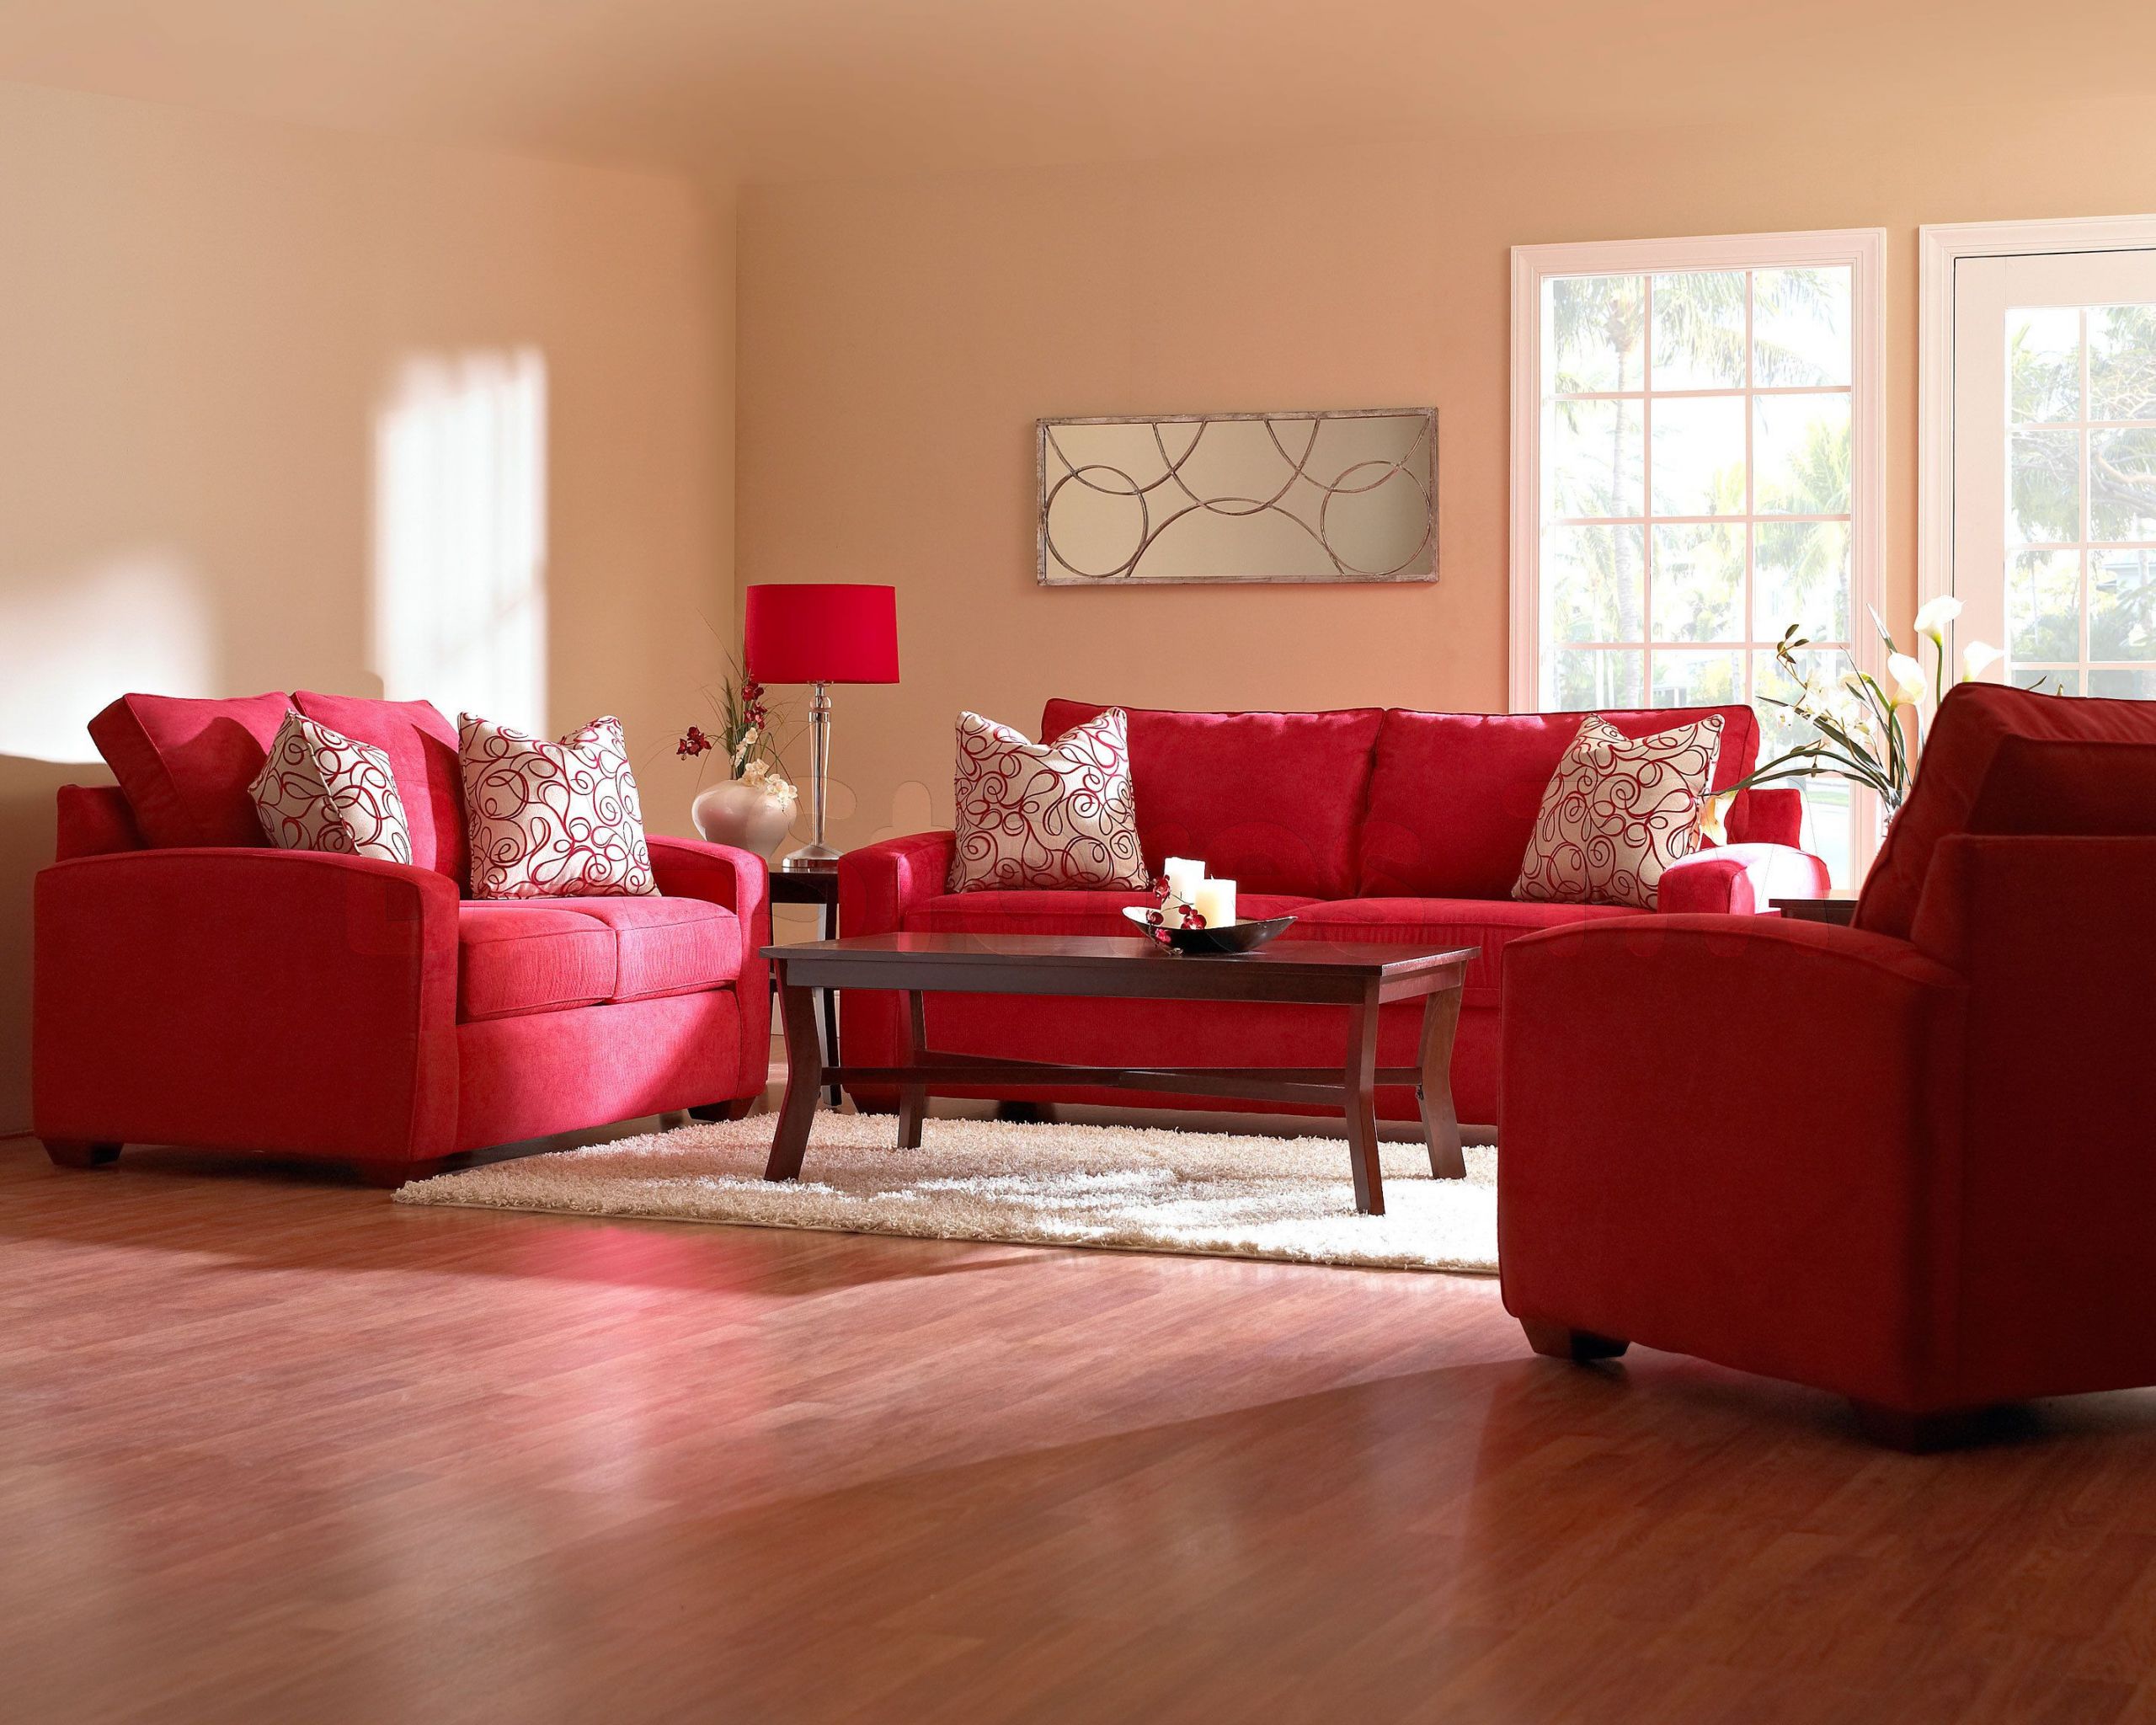 Red Couch Living Room Ideas
 Grey Living Room Red Couch Zion Star